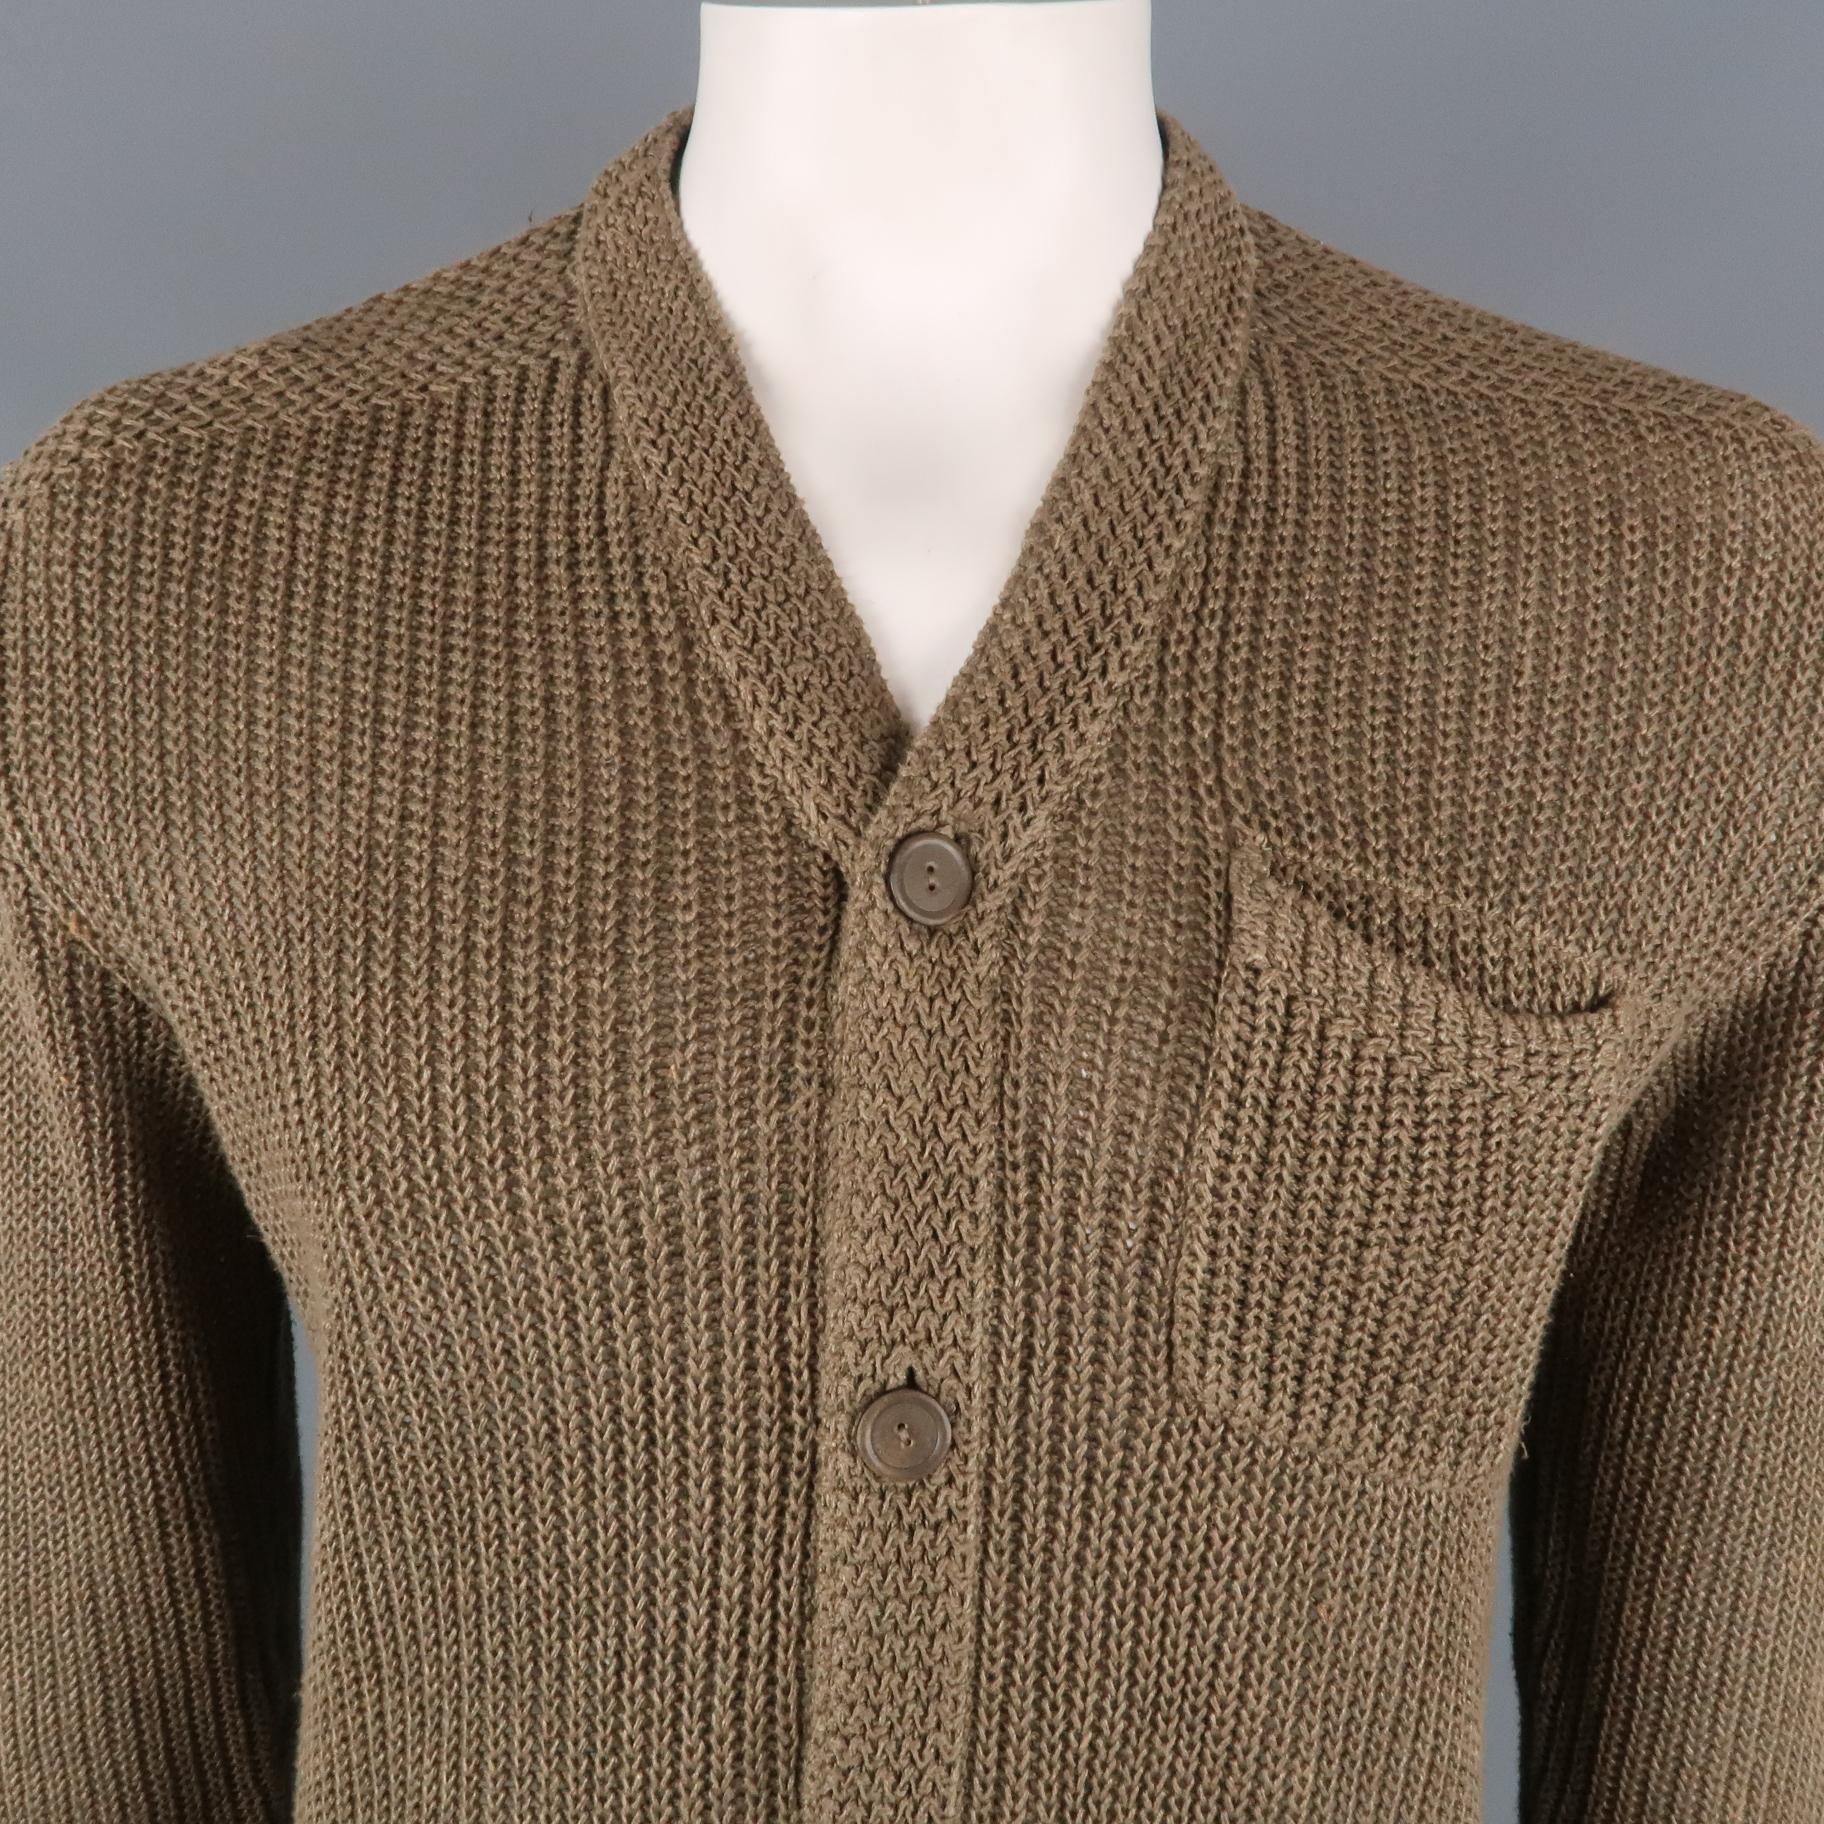 RALPH LAUREN cardigan comes in a tan ribbed knit camel hair blend featuring a high collar style, buttoned closure, and patch pockets.
 
Excellent Pre-Owned Condition.
Marked: L
 
Measurements:
 
Shoulder: 21 in.
Chest: 49 in.
Sleeve: 30 in.
Length: